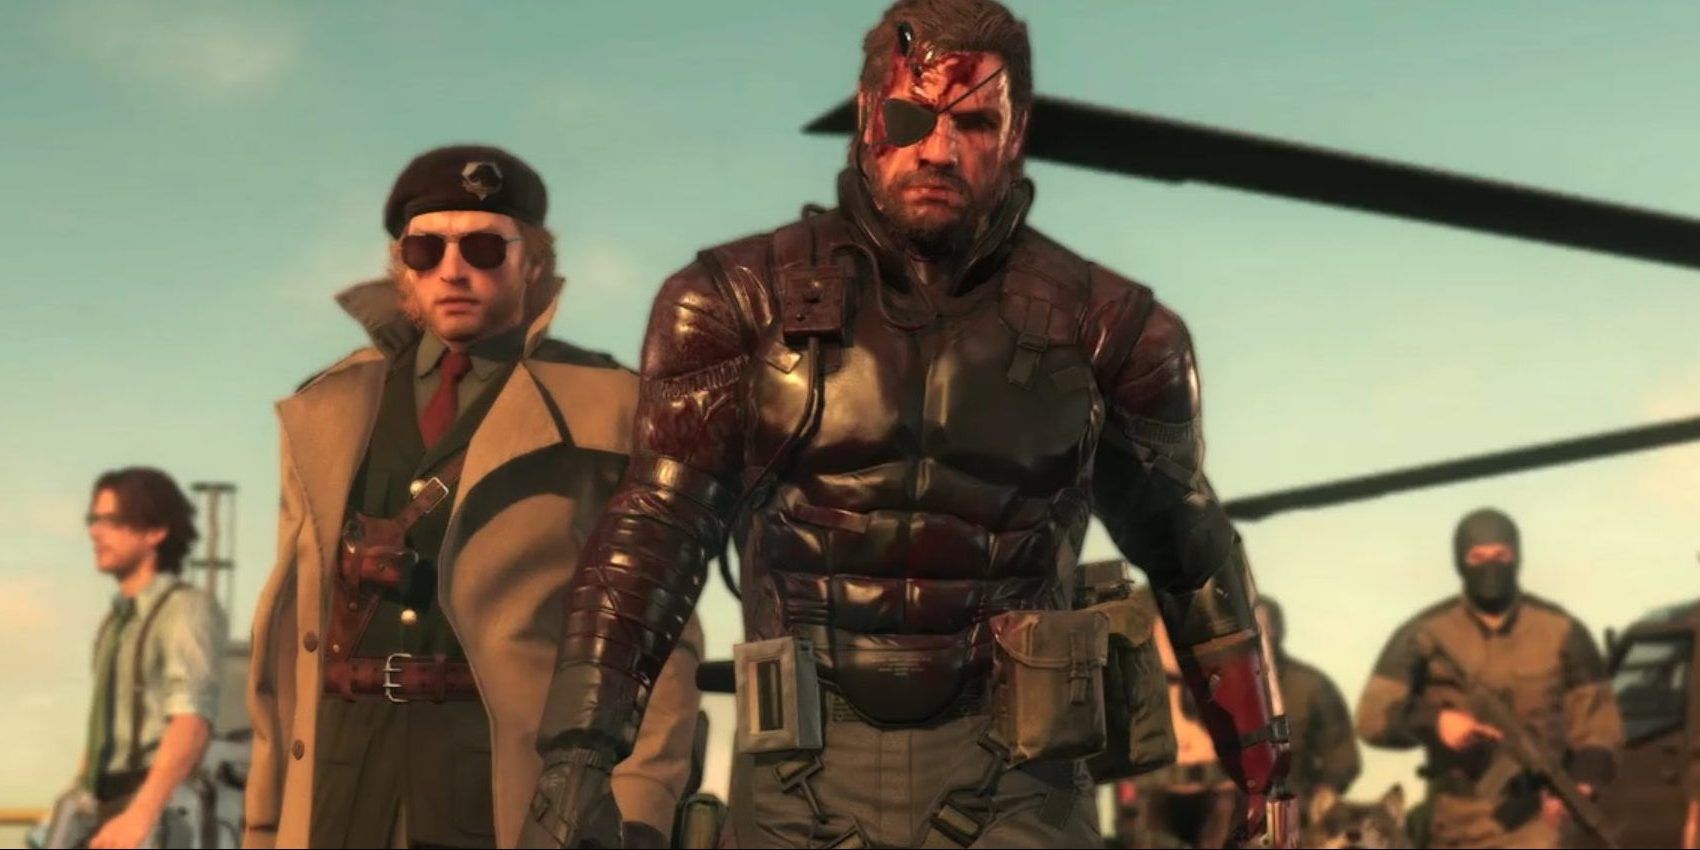 The cast of Metal Gear Solid 5 The Phantom Pain covered in blood